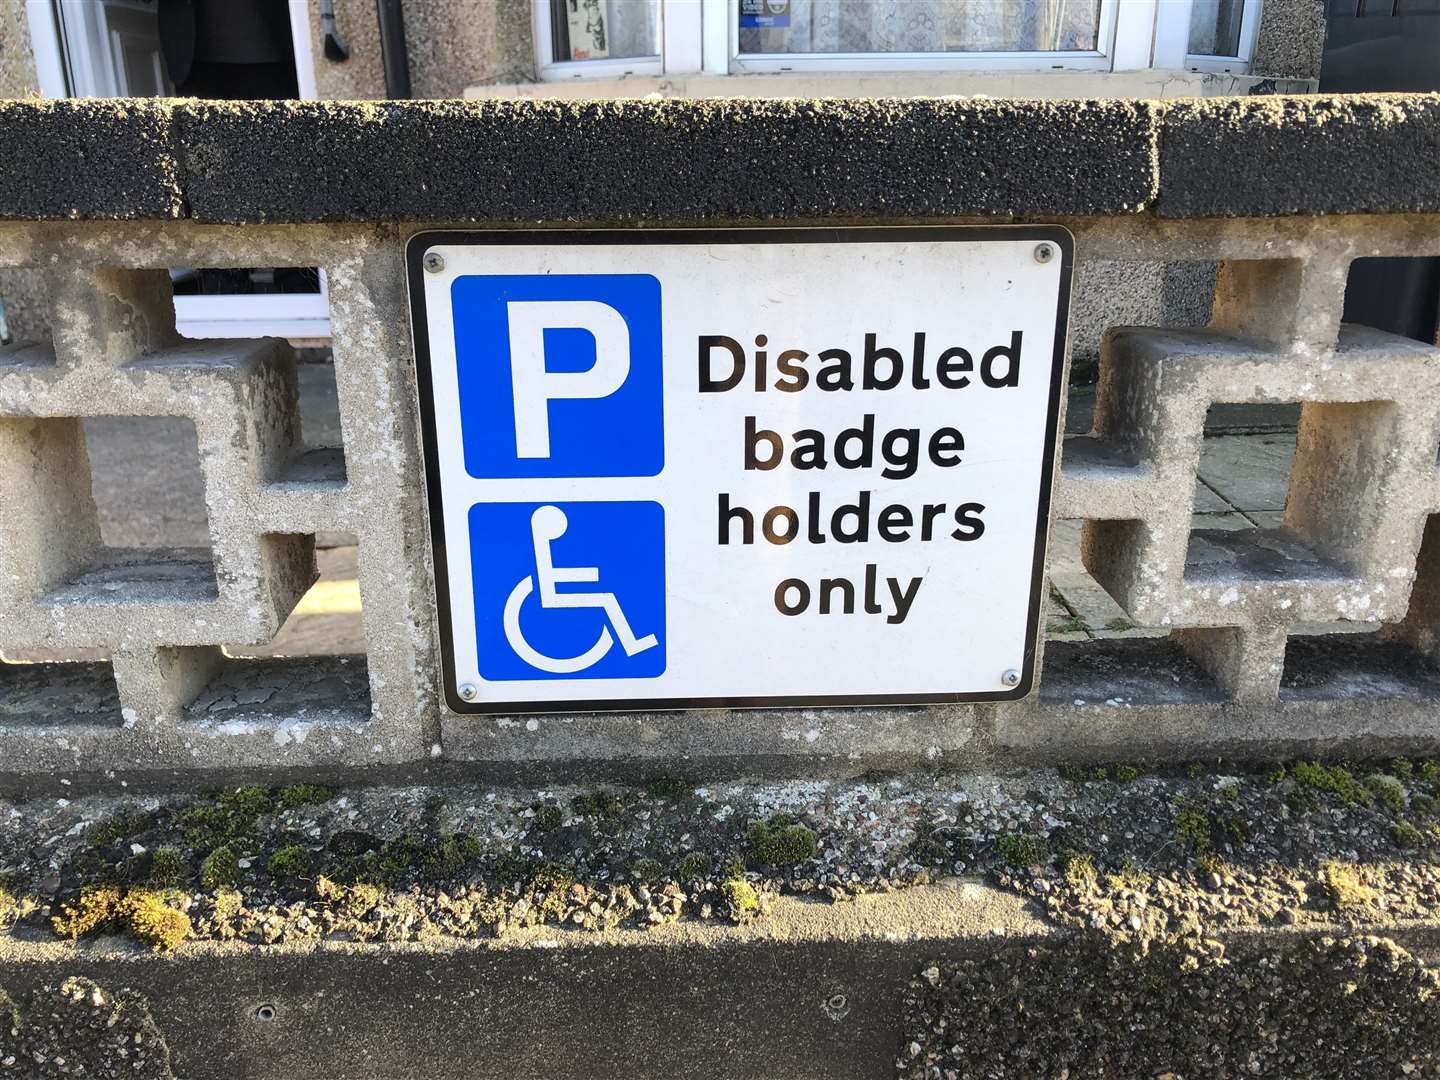 To park in a disabled bay you must display a valid blue badge